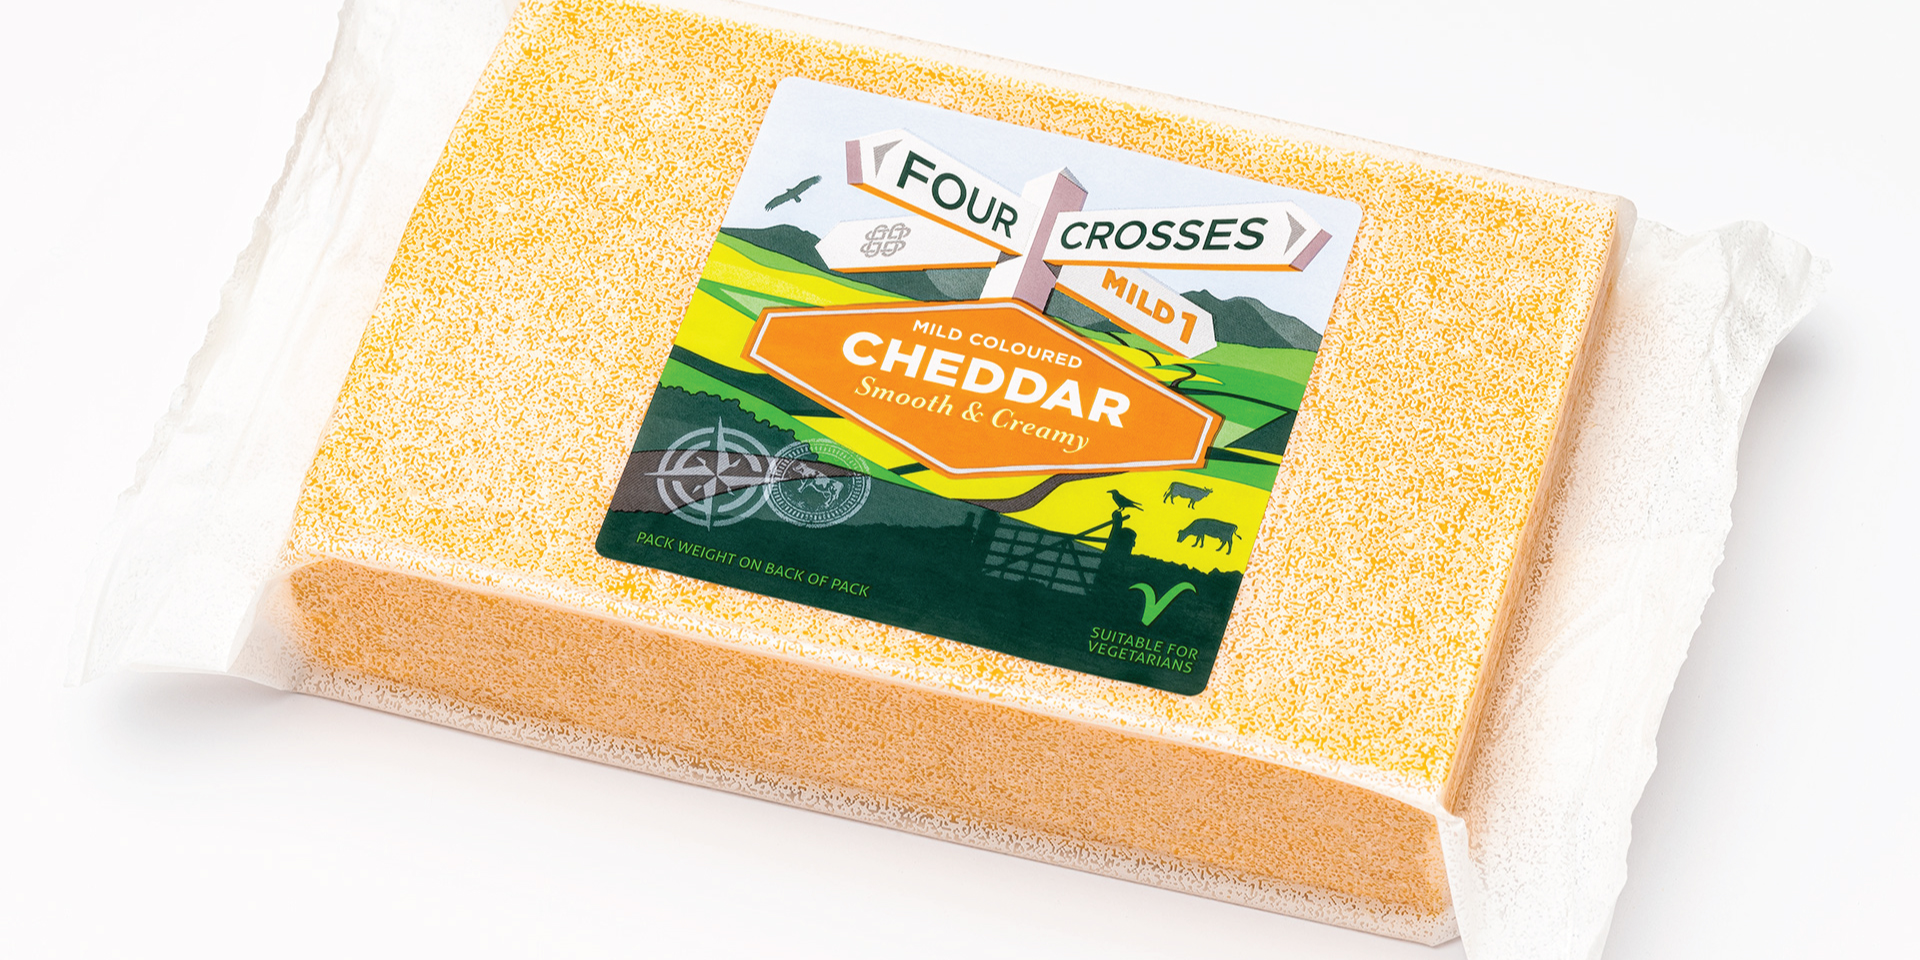 Four Crosses cheese packaging